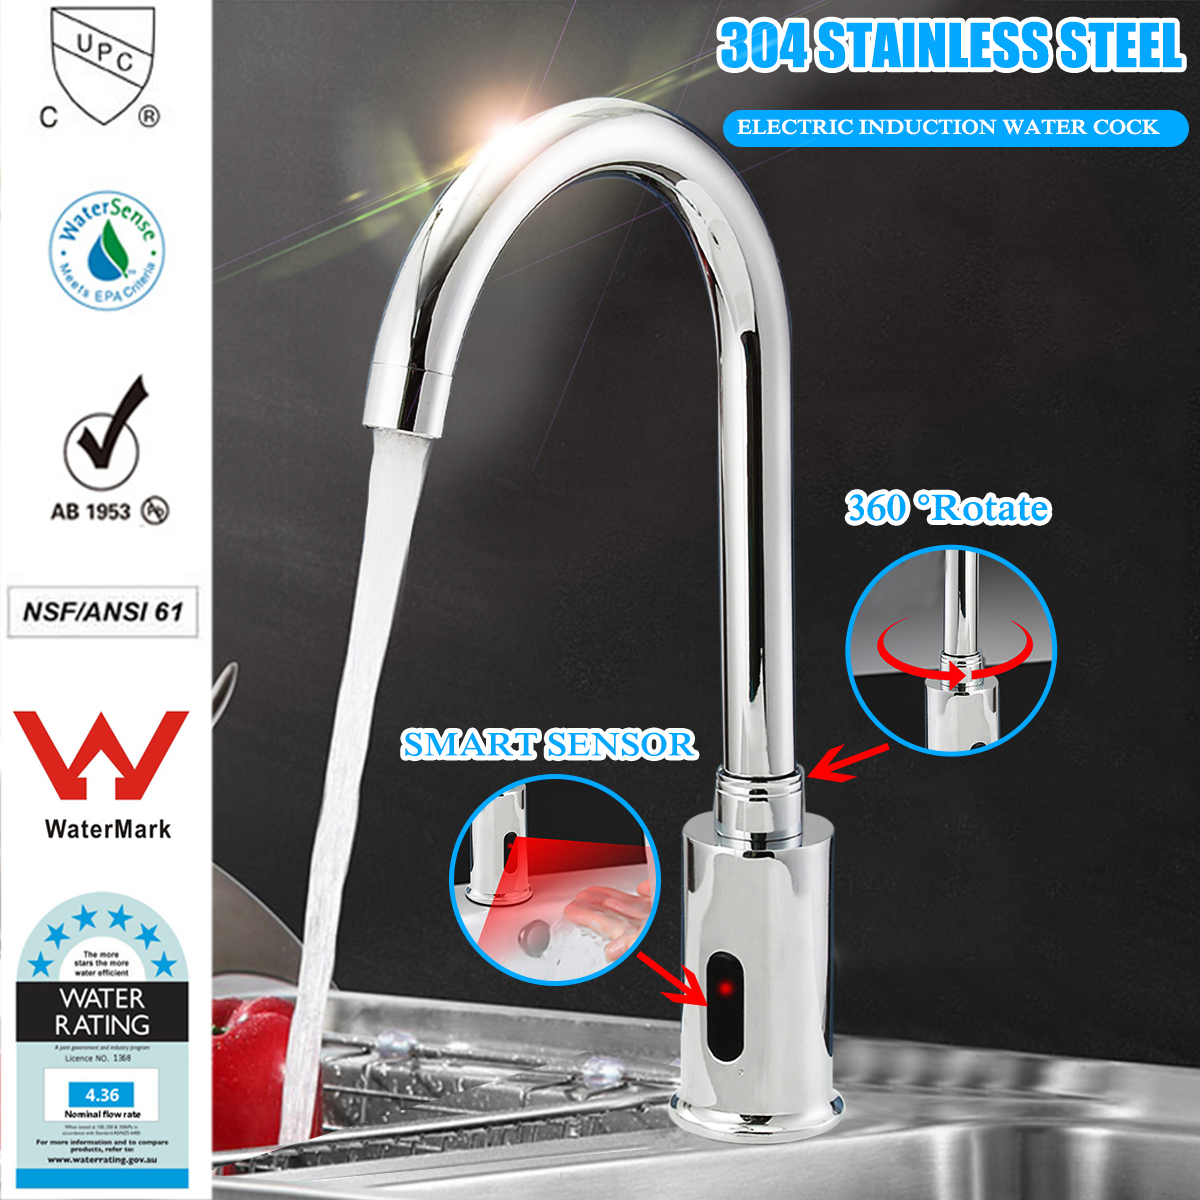 Hands-Touch-Free-Automatic-Electronic-Sensor-Control-Bathroom-Kitchen-Sink-Tap-Basin-Faucet-1386830